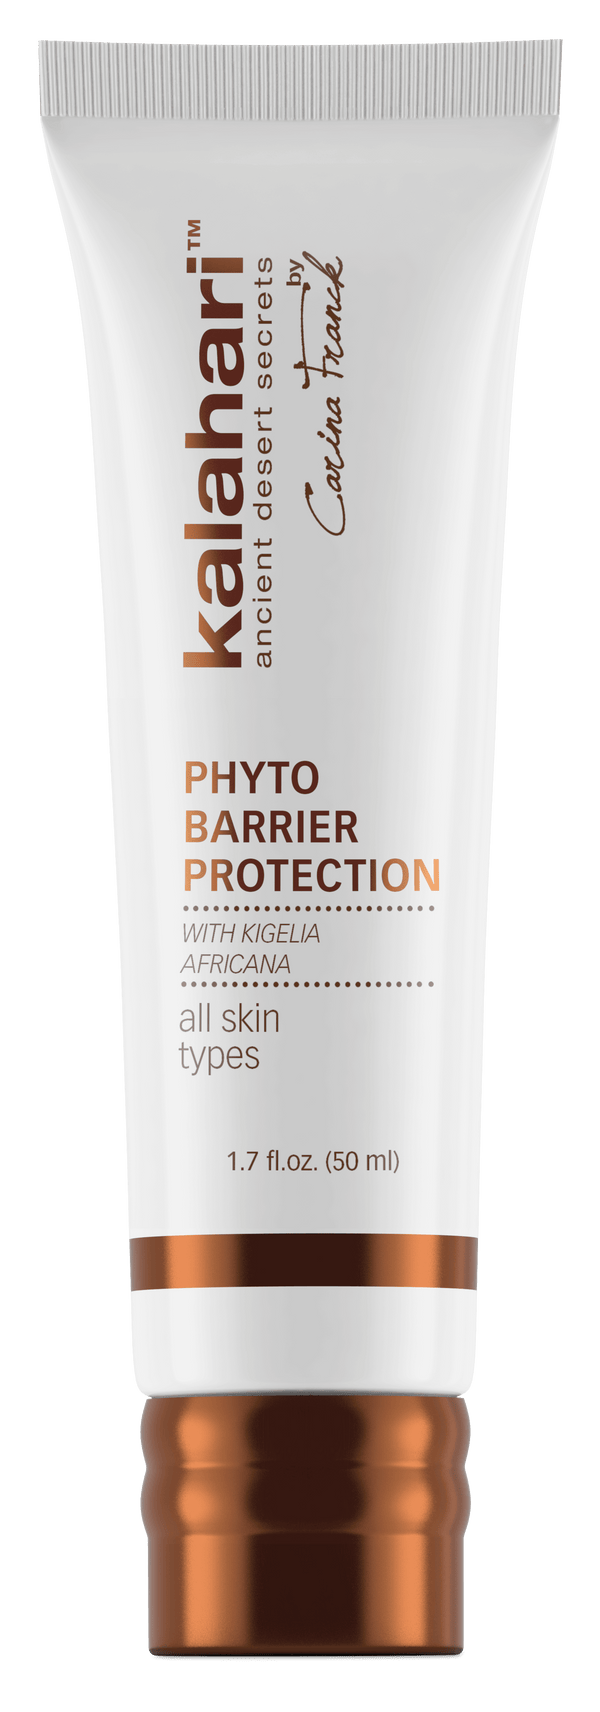 Phyto barrier protection